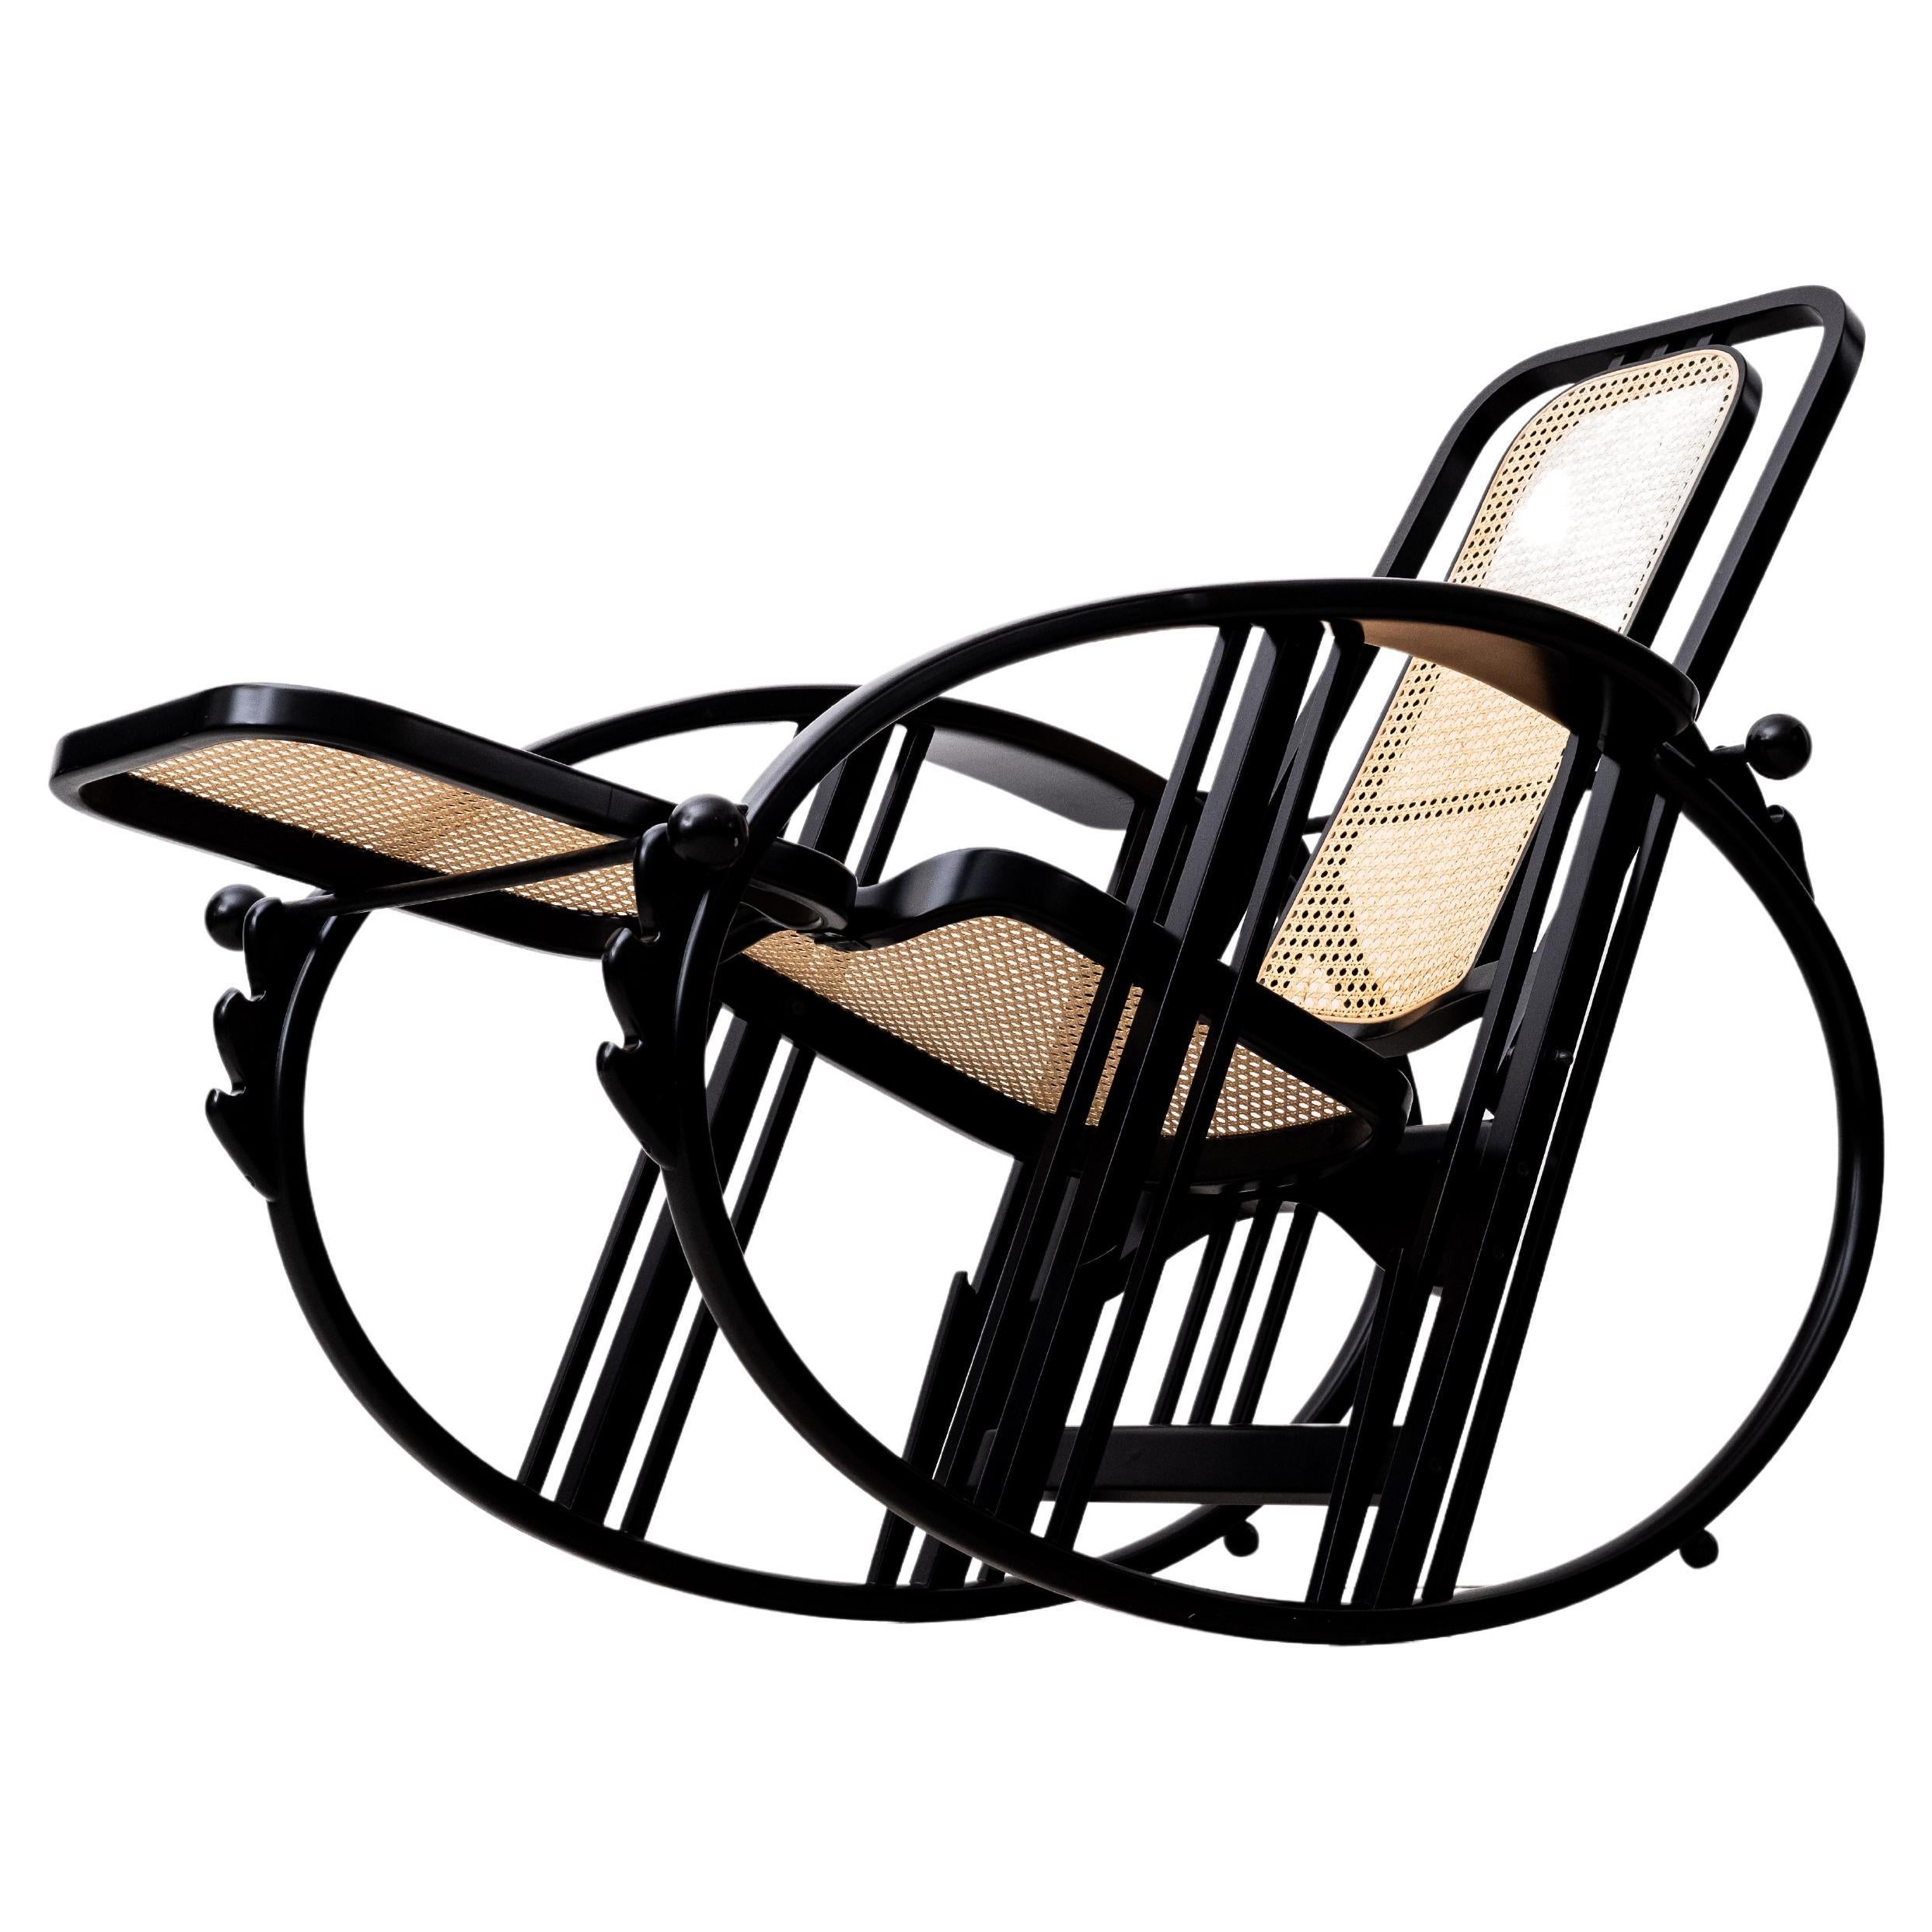 Egg-Rocking Chair by Antonio Volpe (Udine, 1922), ex. by Wittmann (Vienna, 1990) For Sale